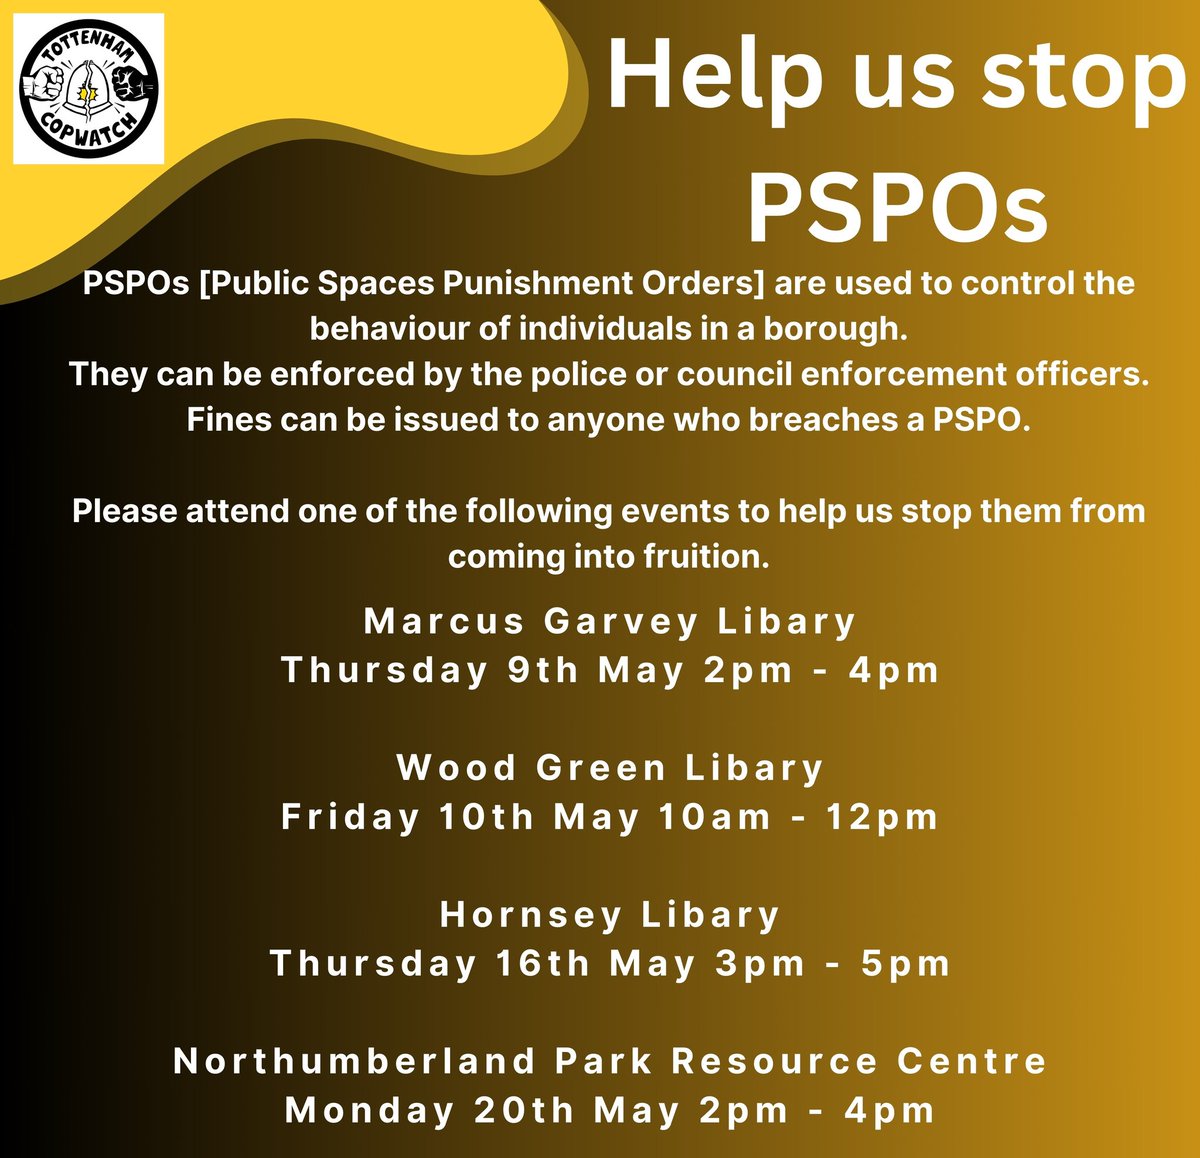 PSPOs are used to control the behaviour of individuals in a borough. They can be enforced by the police or council enforcement officers. Fines can be issued to anyone who breaches a PSPO. Please attend one of the following events to help us stop them from coming into fruition.